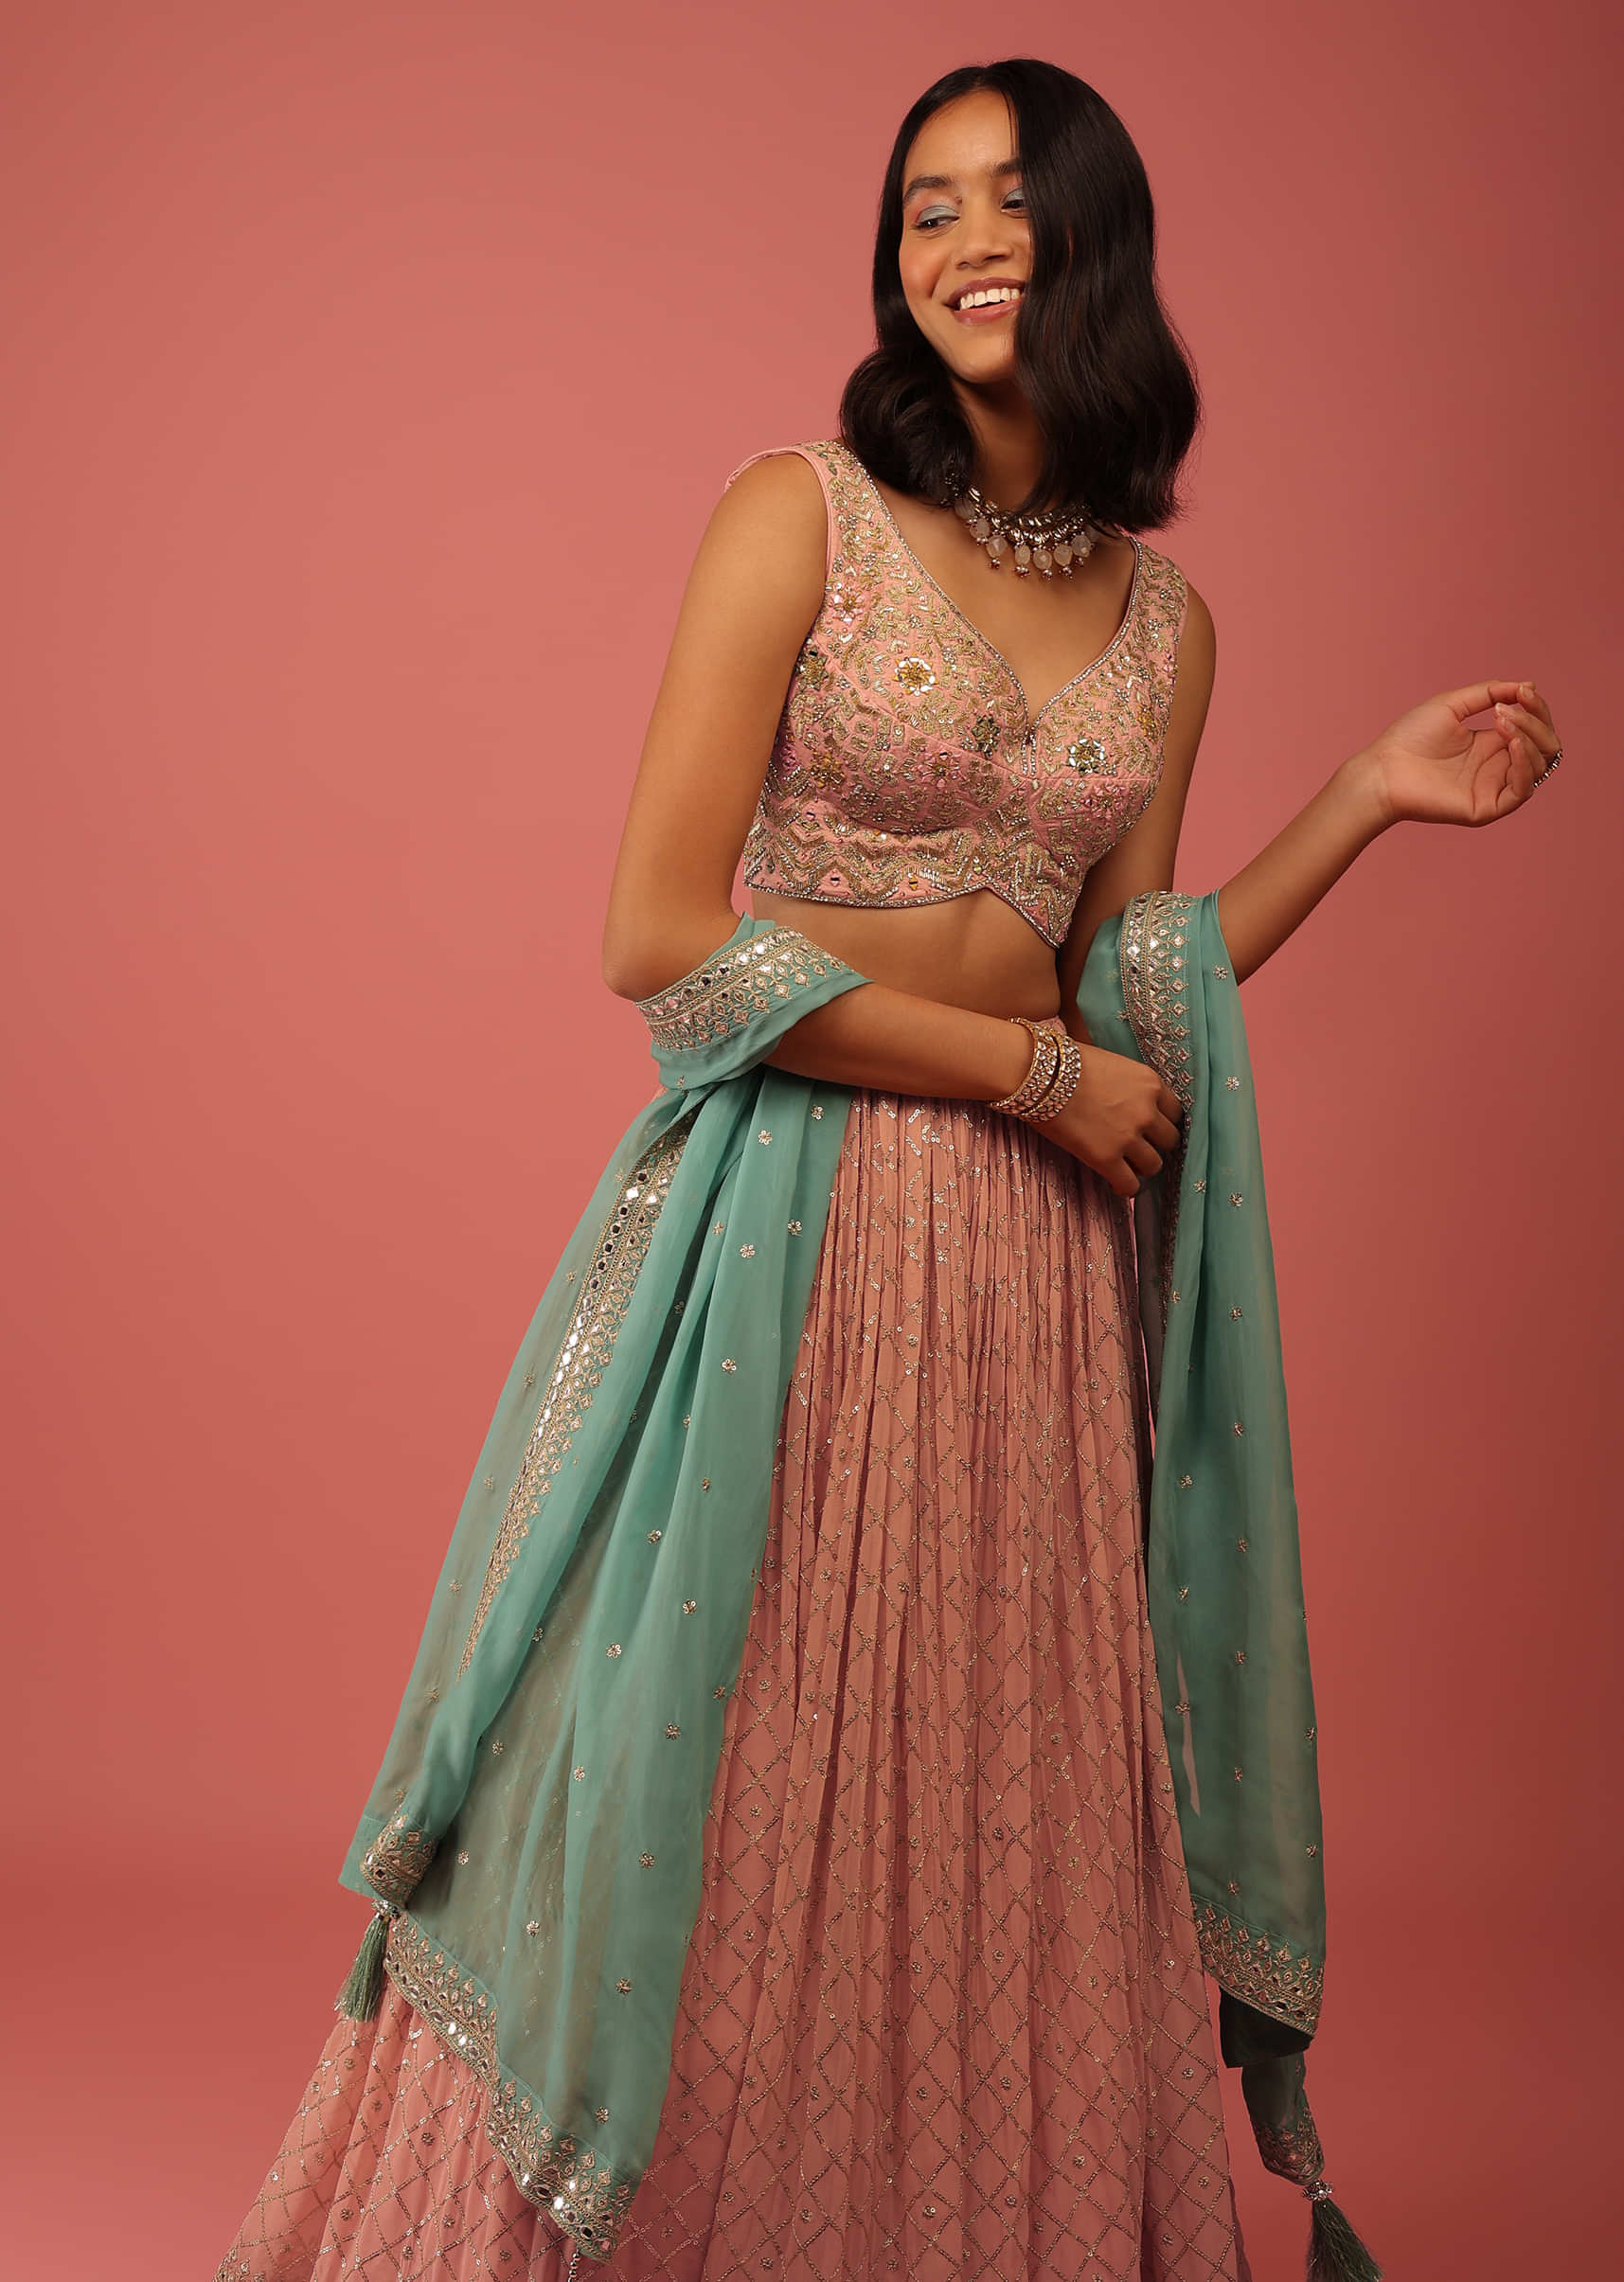 Rose Pink Lehenga Choli With multicolor Resham Border And Sequin Mesh Jaal